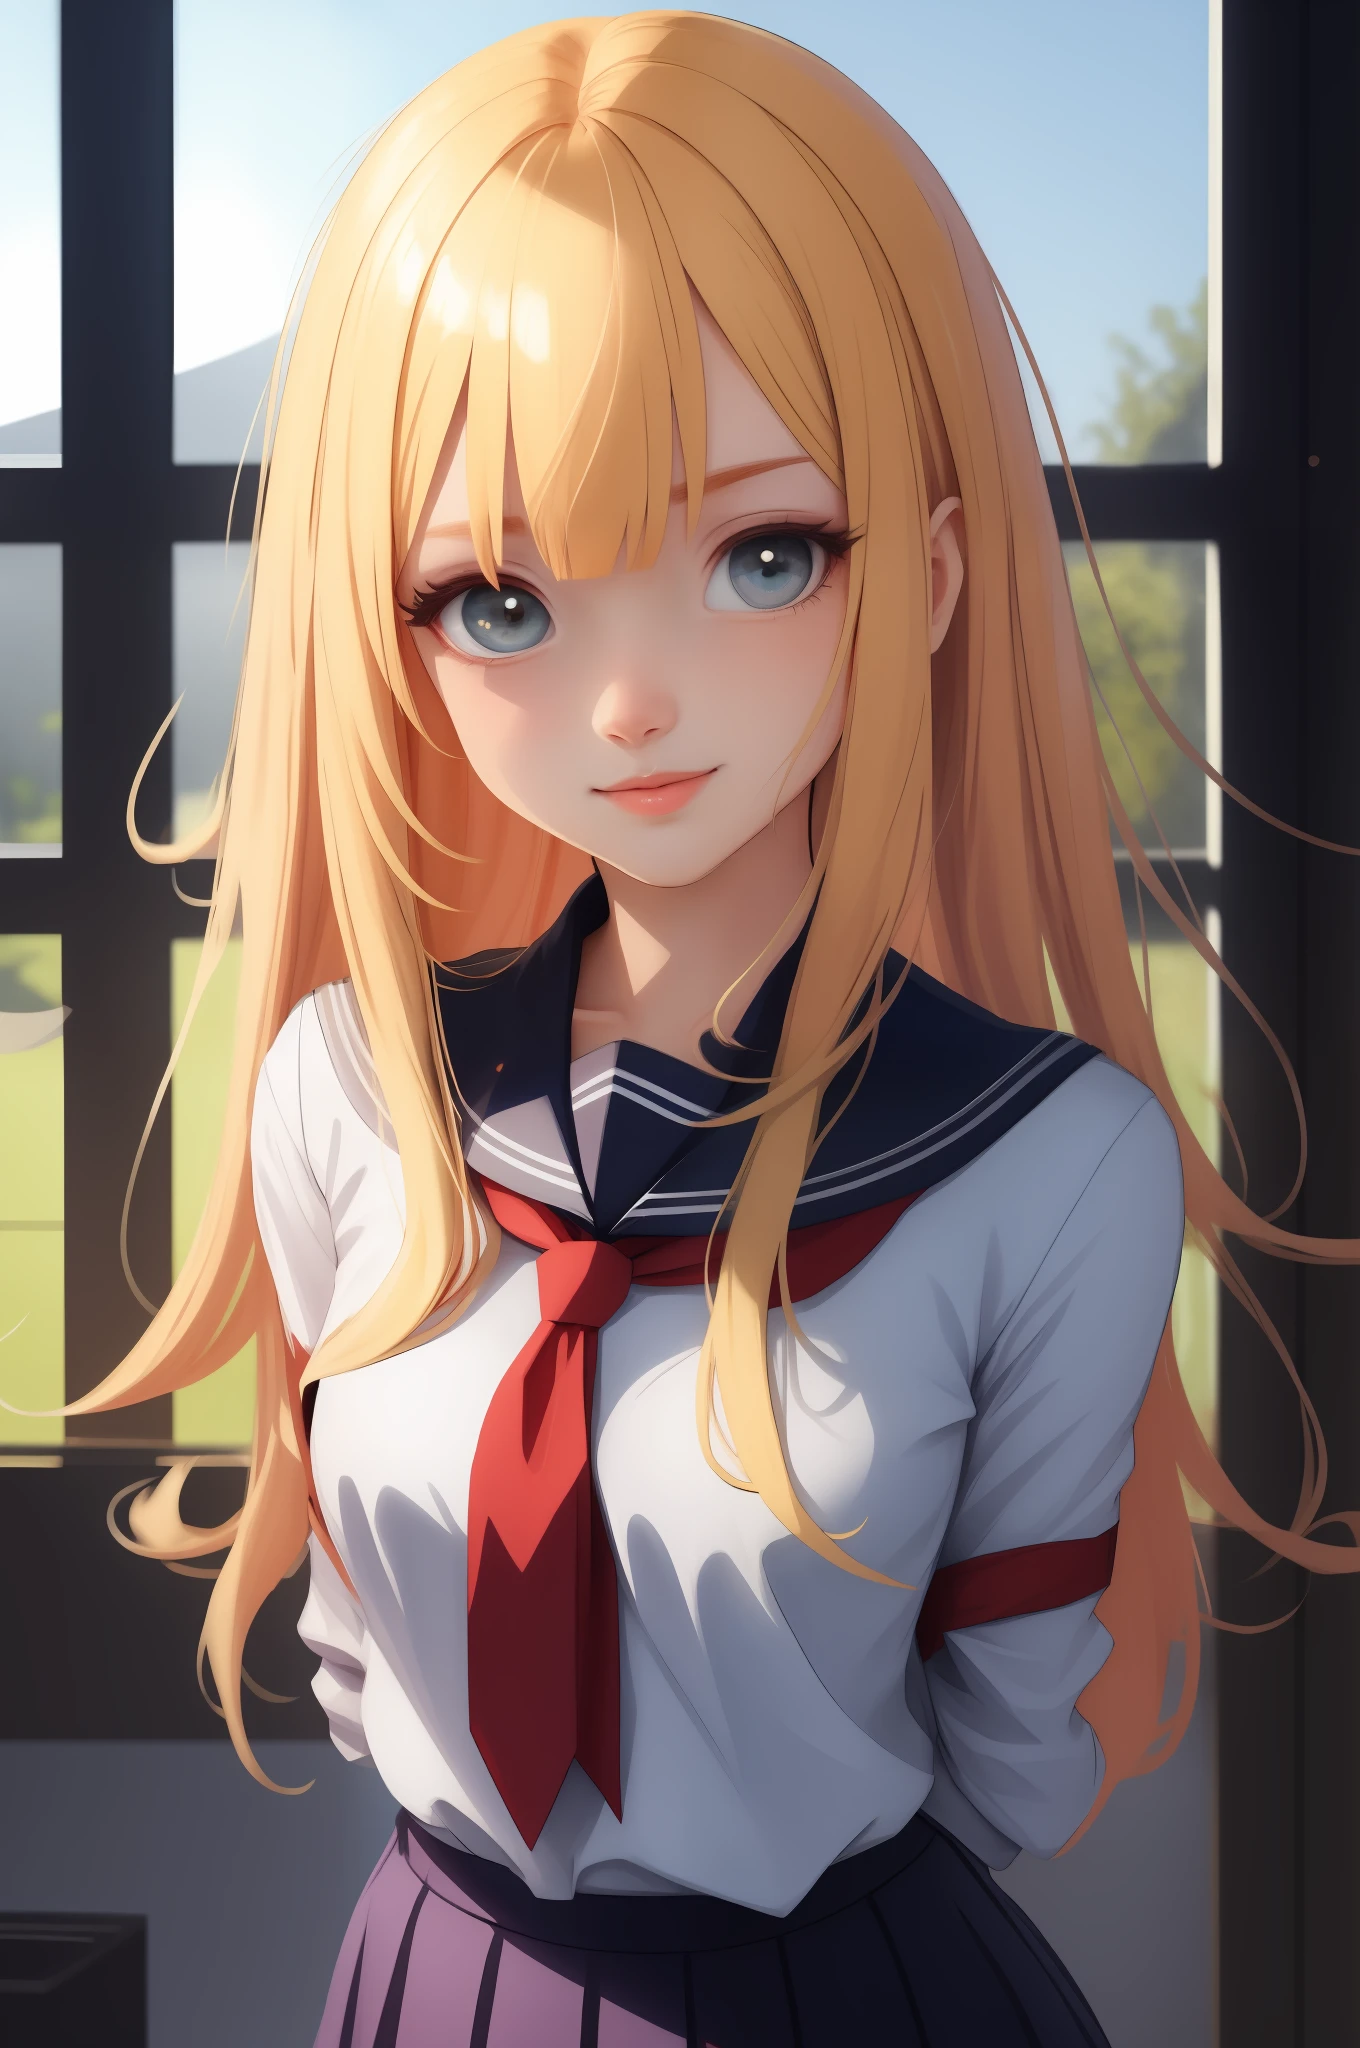 Bound arms, arms behind back, highly resolution, best qualitiy, illustration, Ultra detailded, (Detailed face), (Detailed eyes), Soft lighting, Best Quality, hyper-detail, Masterpiece, Looking at Viewer, Smile, 1girls, Solo, Blonde hair, Small breasts, , Skirt, (Colorful), Upper body, The Hut, Window, Night, Moon,Giant 